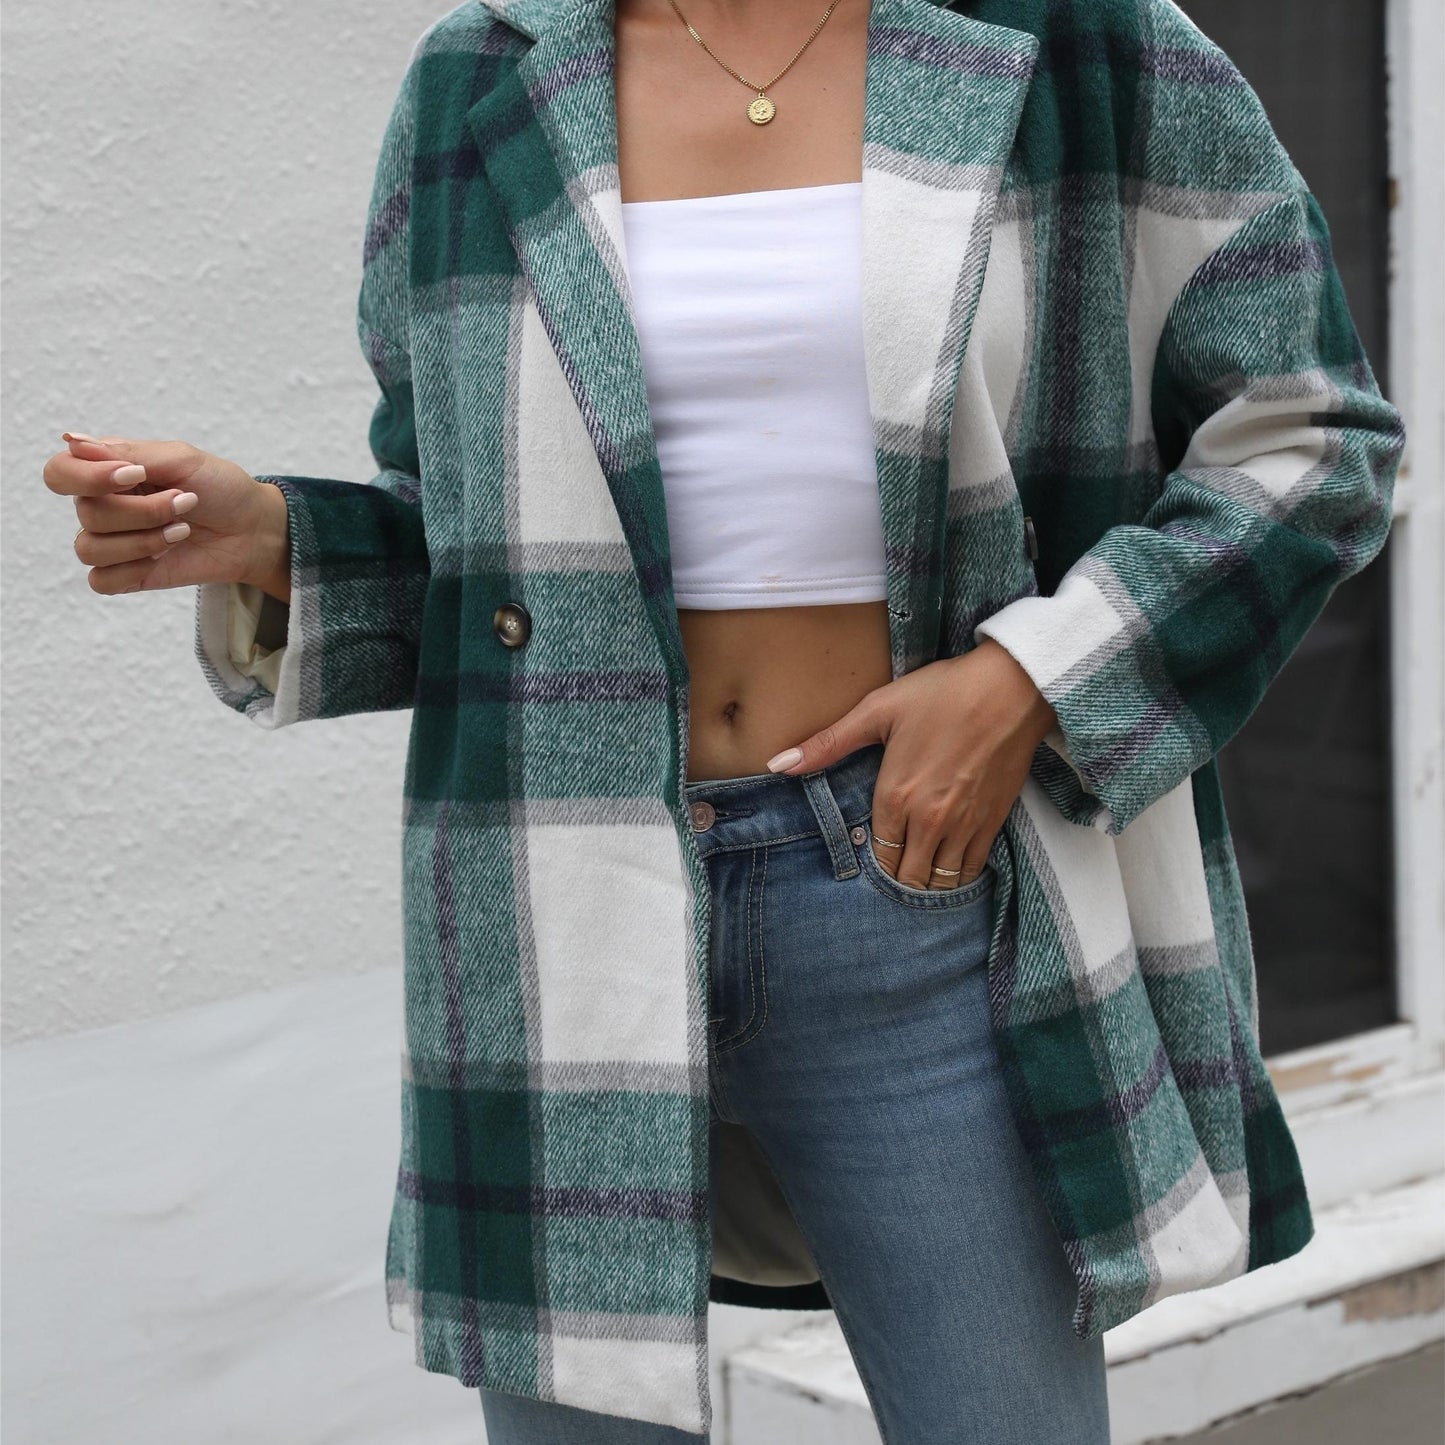 Antmvs Gingham Button Drop Shoulder Coat, Casual Long Sleeve Fashion Loose Plaid Outerwear, Women's Clothing